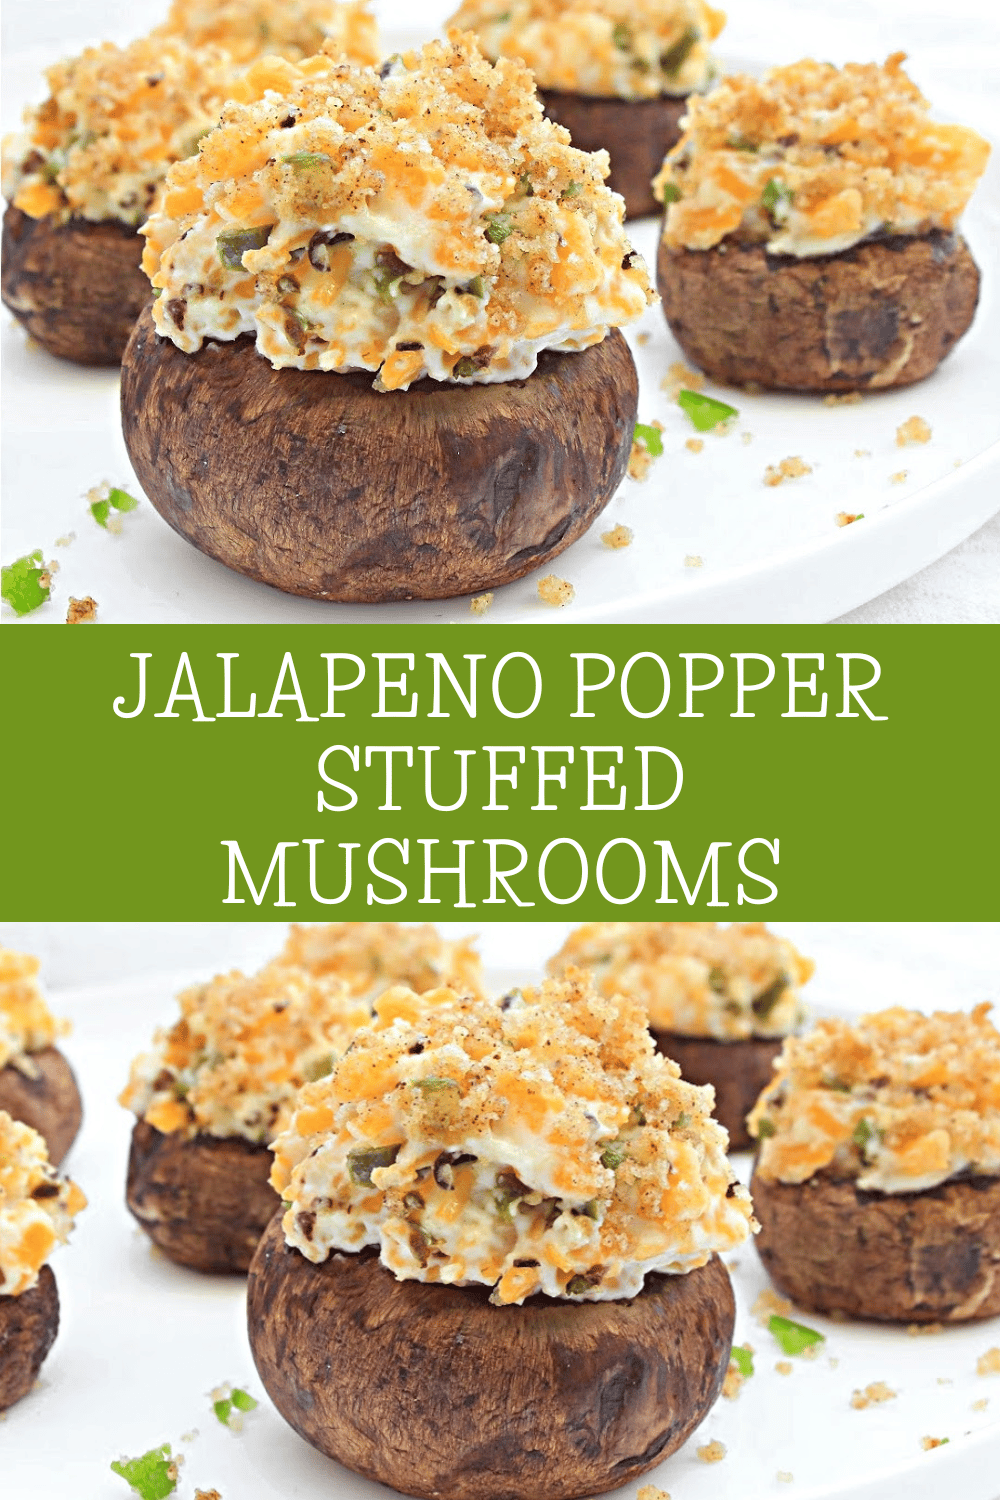 Jalapeno Popper Stuffed Mushrooms ~ Baked mushrooms stuffed with creamy dairy-free cheeses, jalapeno pepper, and buttery breadcrumb topping. Serve as an easy holiday appetizer or game day snack!  via @thiswifecooks